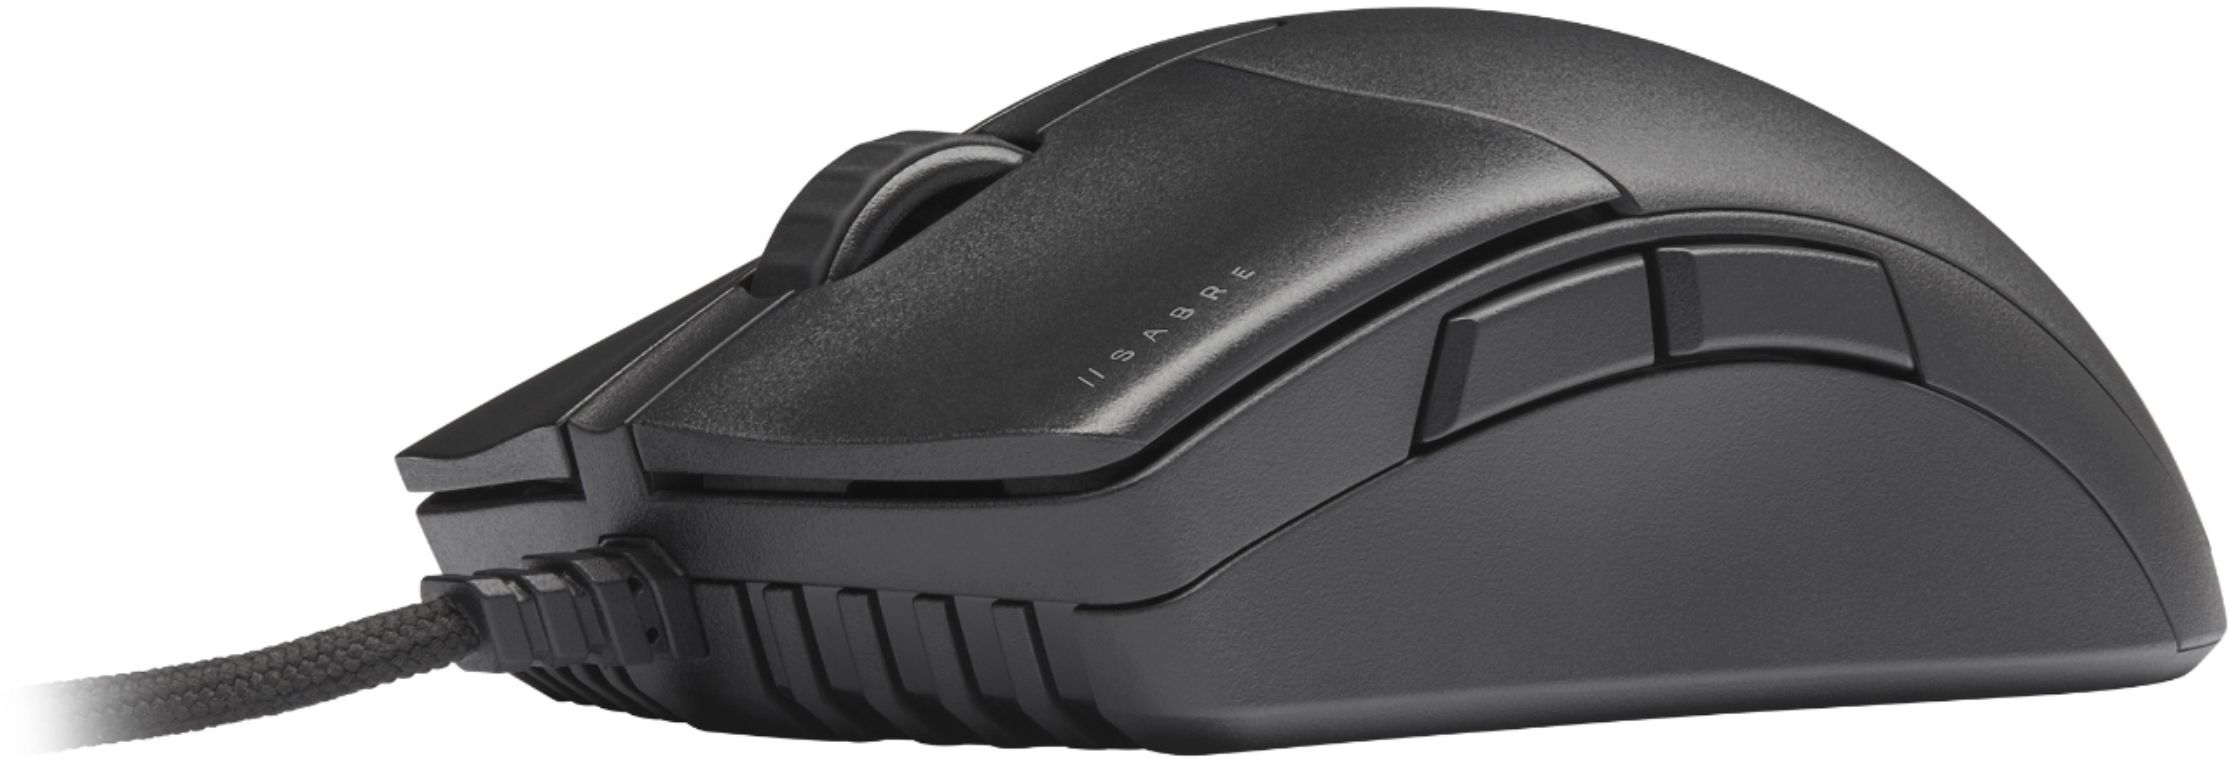 Left View: Arozzi - Favo Light Weight Gaming Mouse - Black